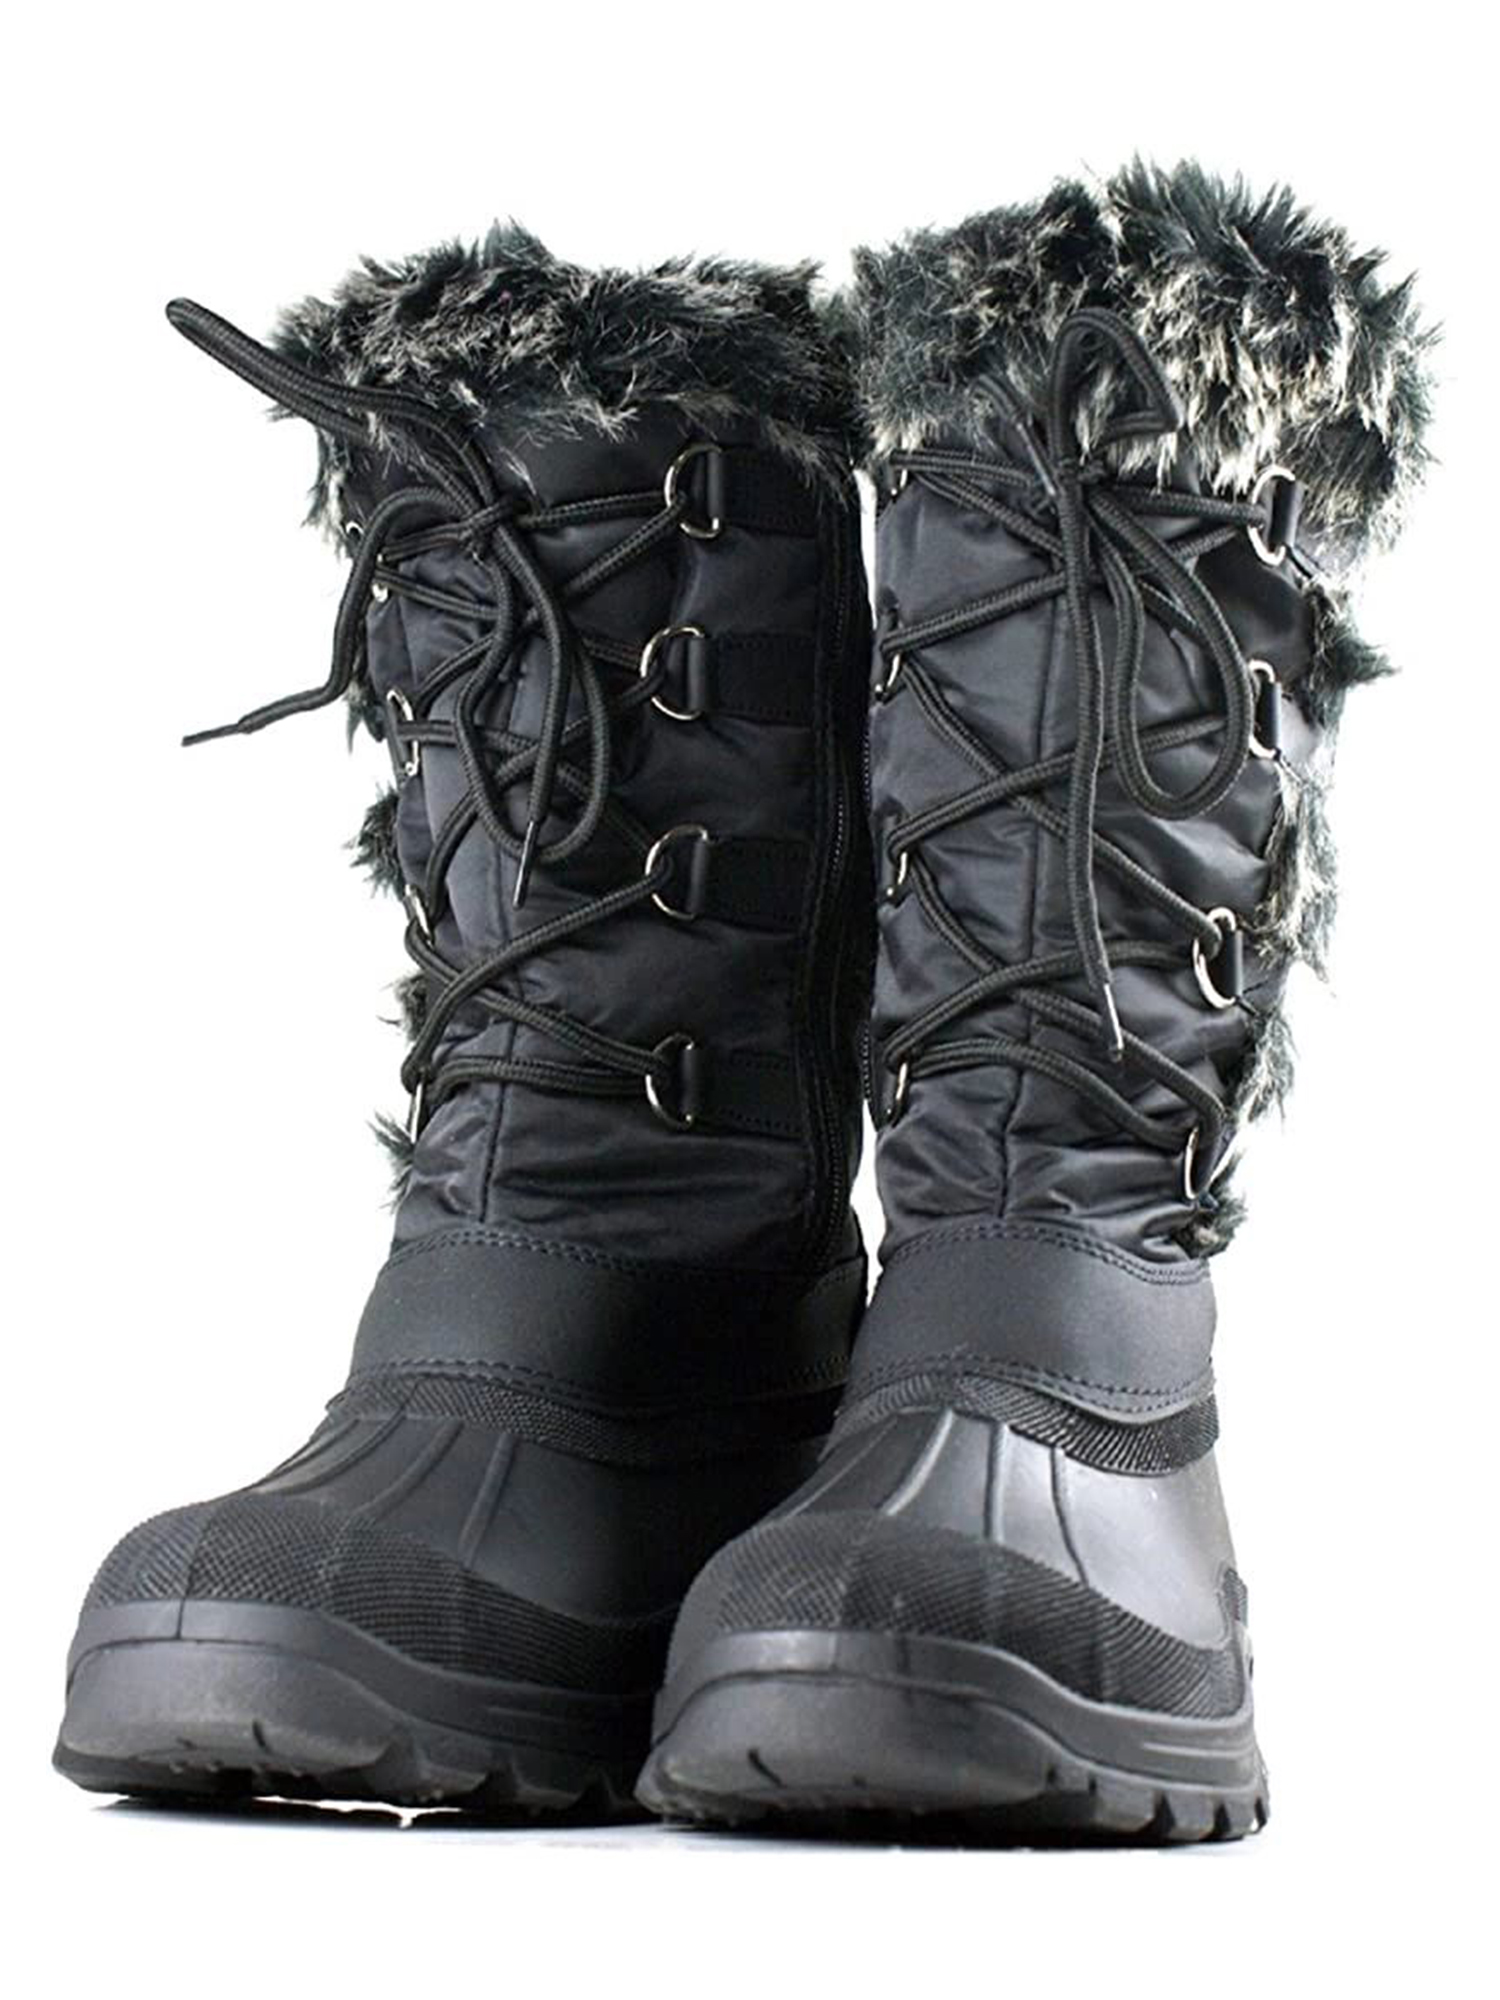 Womens Winter Boots Snow Boots Womens Fur Lined Warm Winter Boots Ladies Warm Shoes Waterproof and Anti-Slip Mid Calf Winter Walking Boots